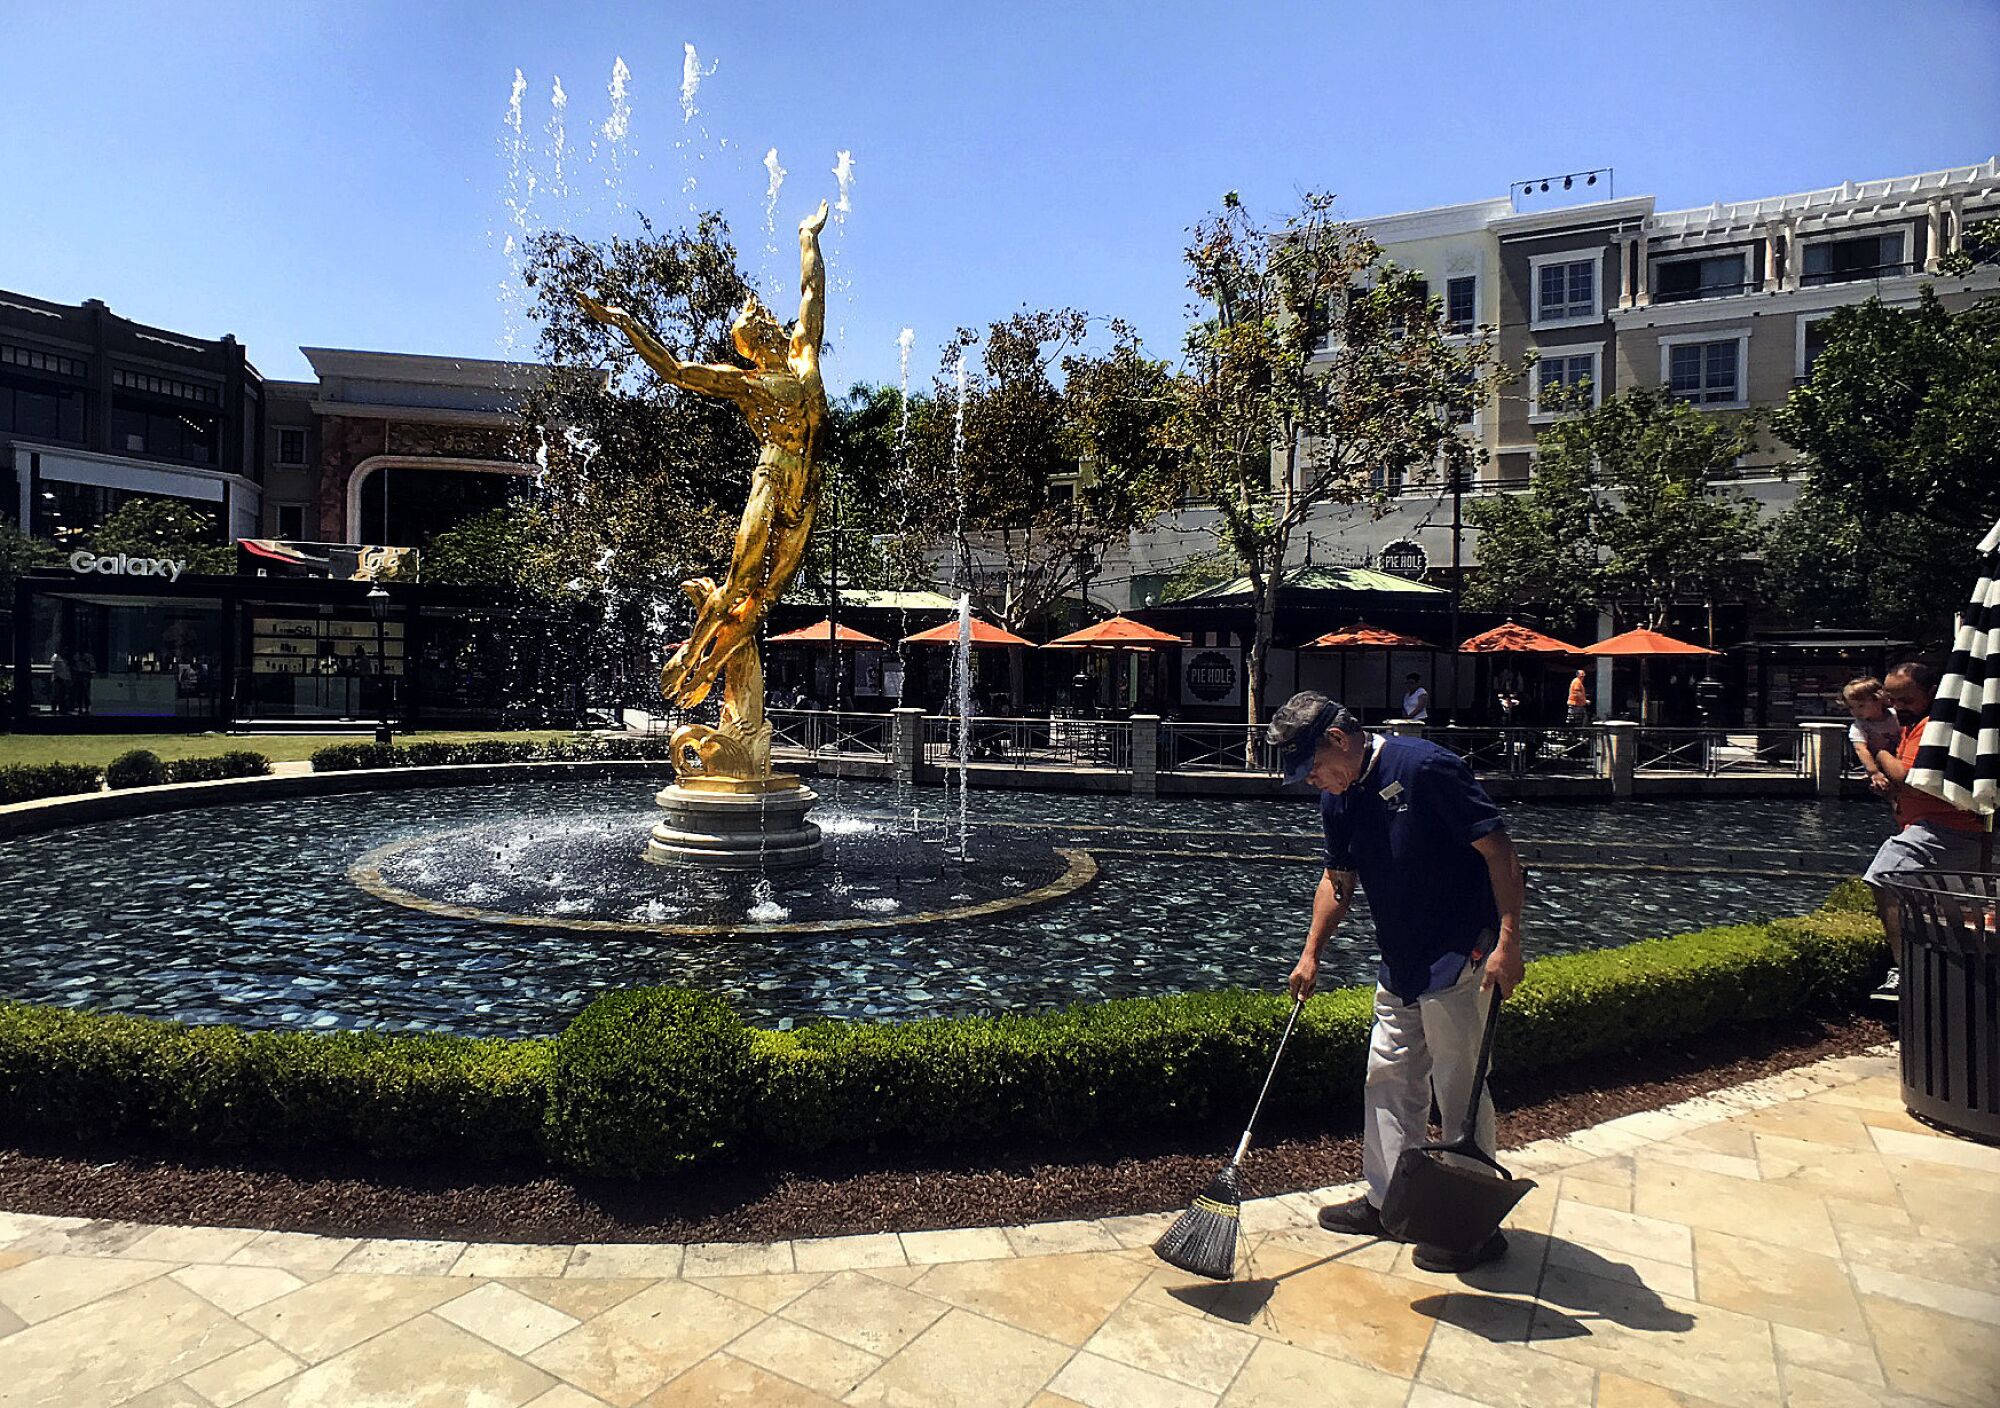 A man sweeps by an outdoor fountain